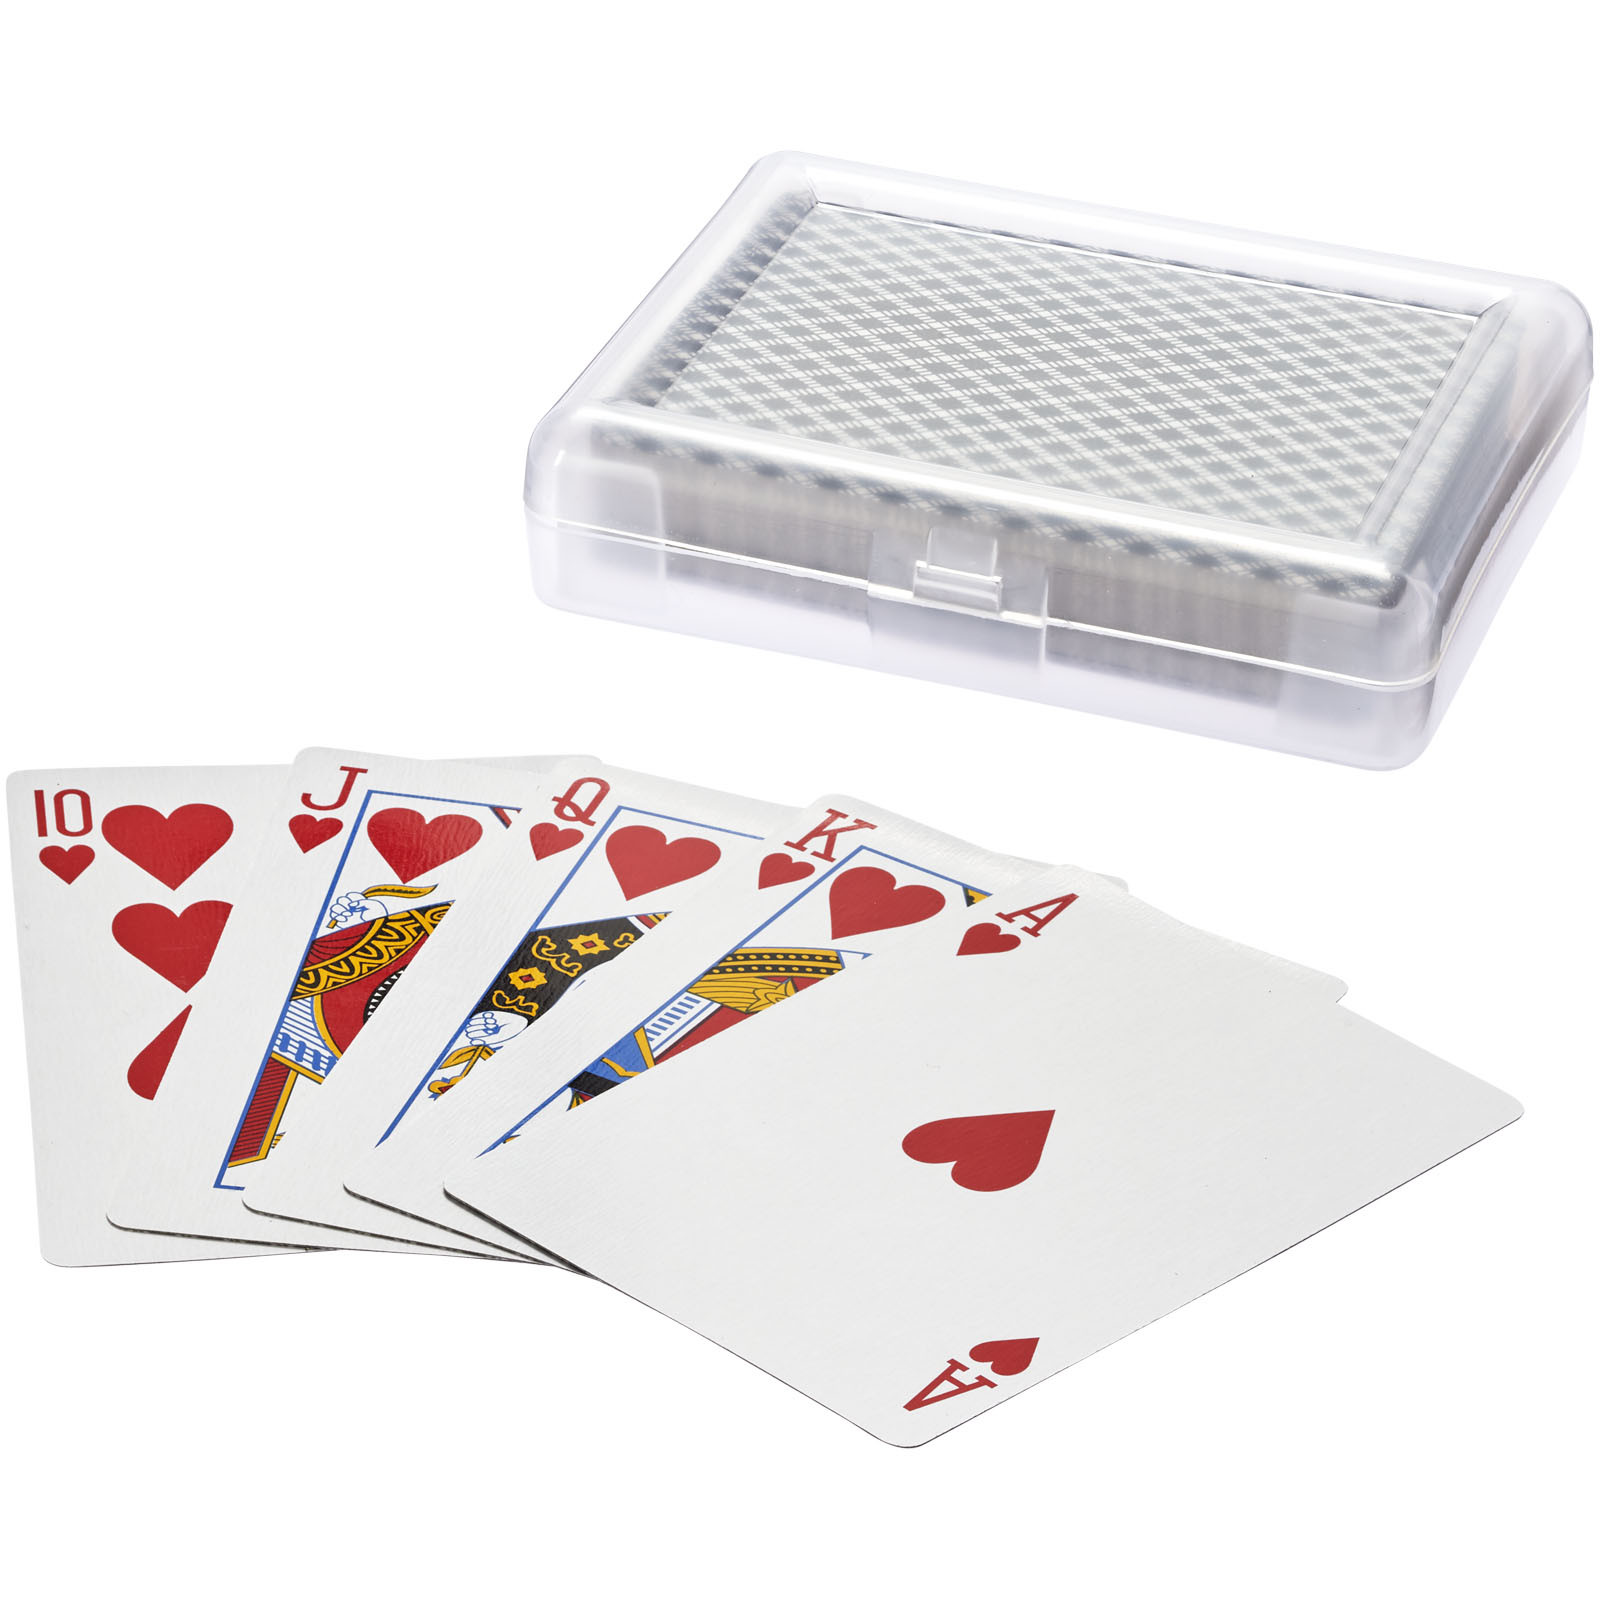 Advertising Indoor Games - Reno playing cards set in case - 0